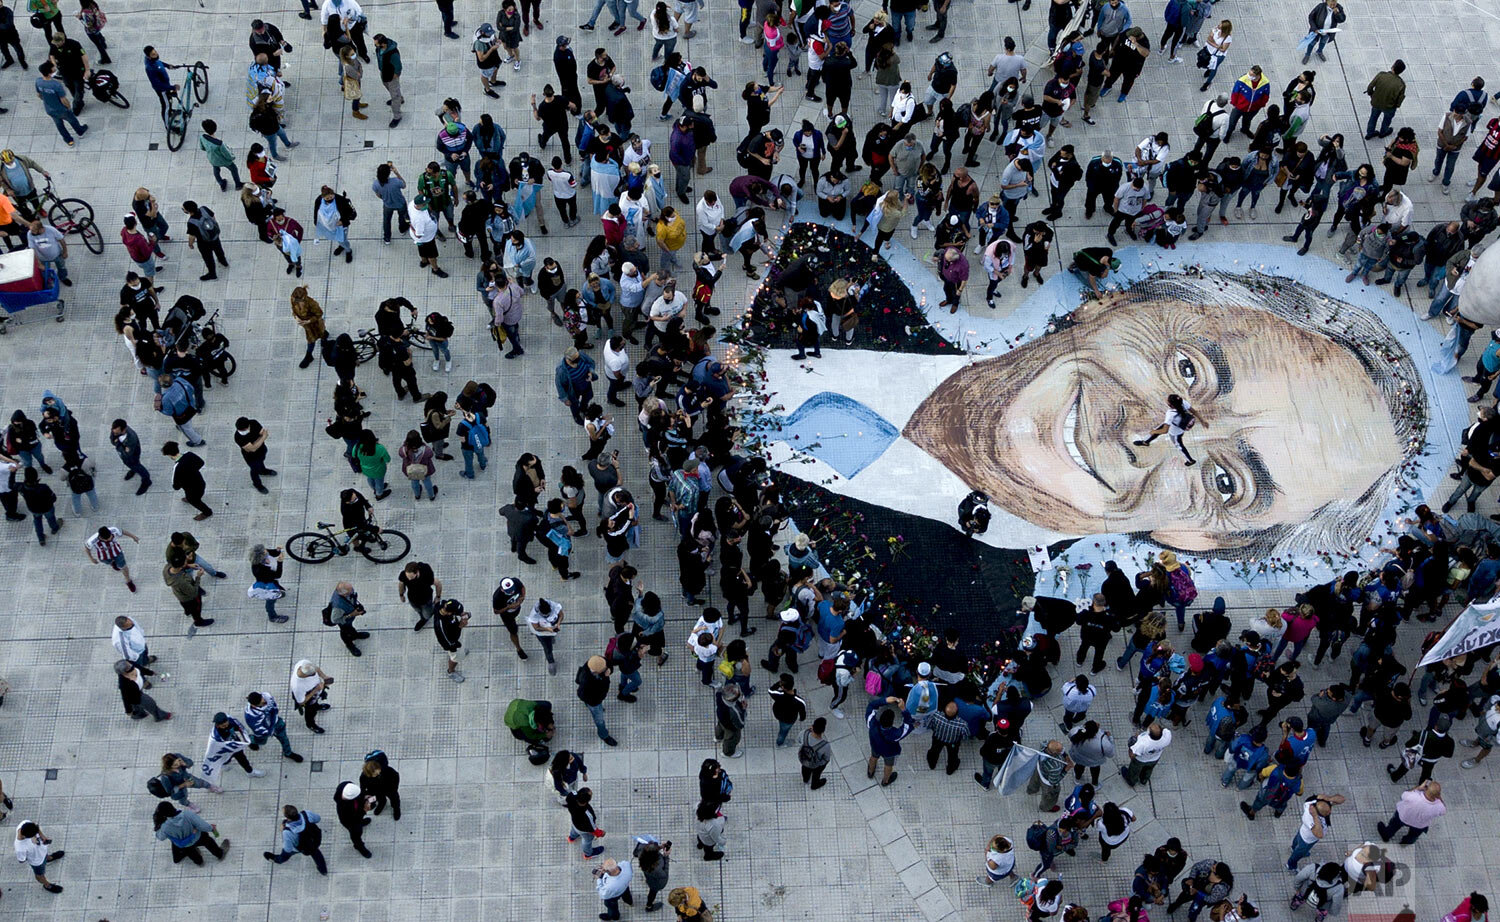  People surround a sidewalk drawing of Argentina's former President Nestor Kirchner to honor him on the 10-year anniversary of his death at Plaza de Mayo in Buenos Aires, Argentina, Oct. 27, 2020. (AP Photo/Natacha Pisarenko) 